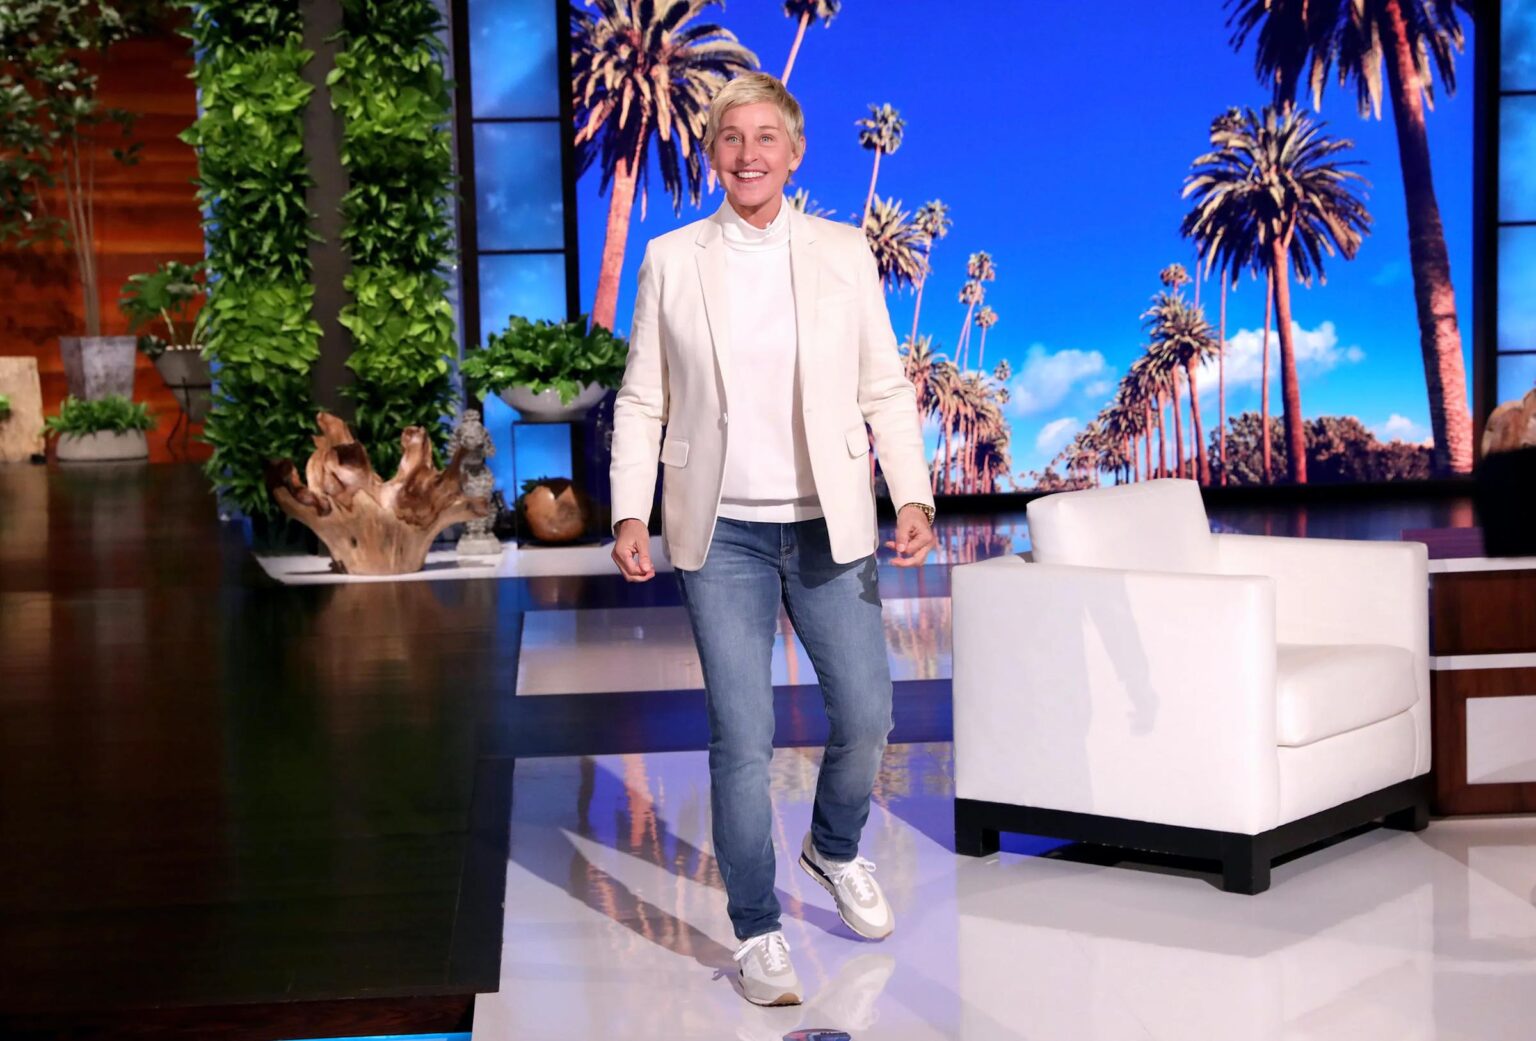 Is Ellen DeGeneres mean? More allegations about her eponymous show have recently surfaced. Did staffers really mistreat fans?